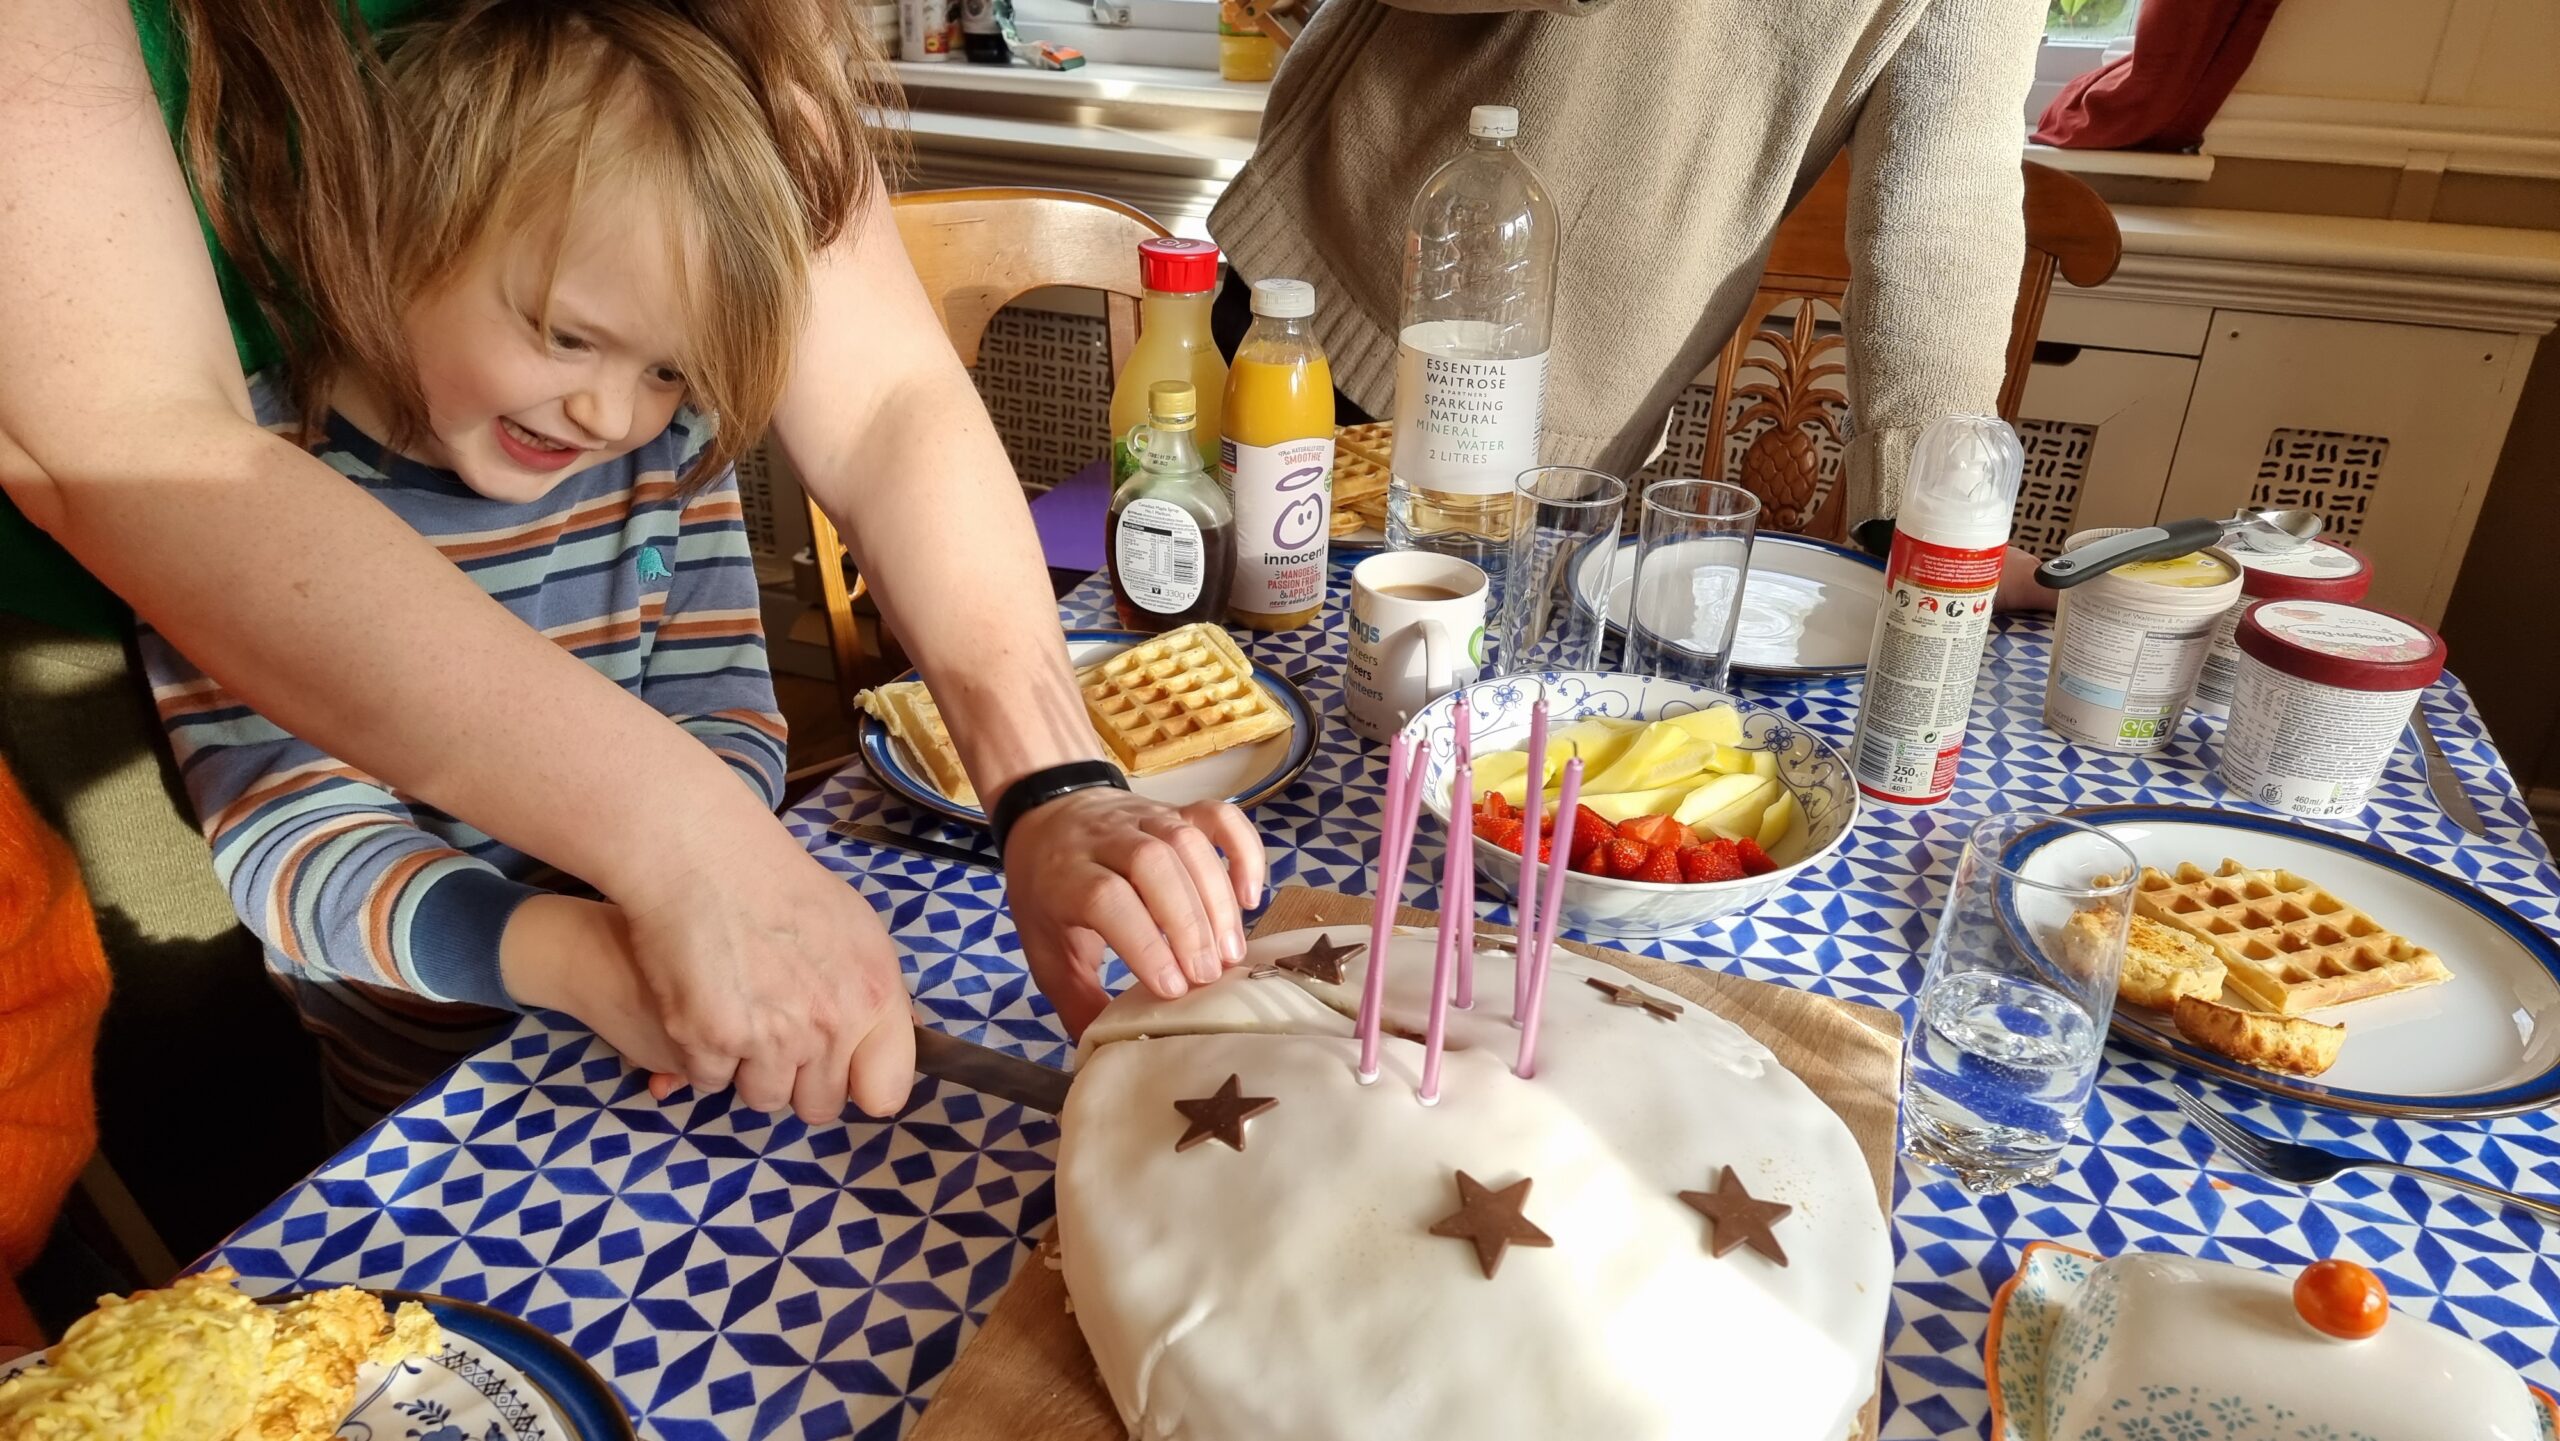 A boy in blue-and-brown striped pyjamas, on a table stacked with plates of waffles, slices into a birthday cake with six candles.